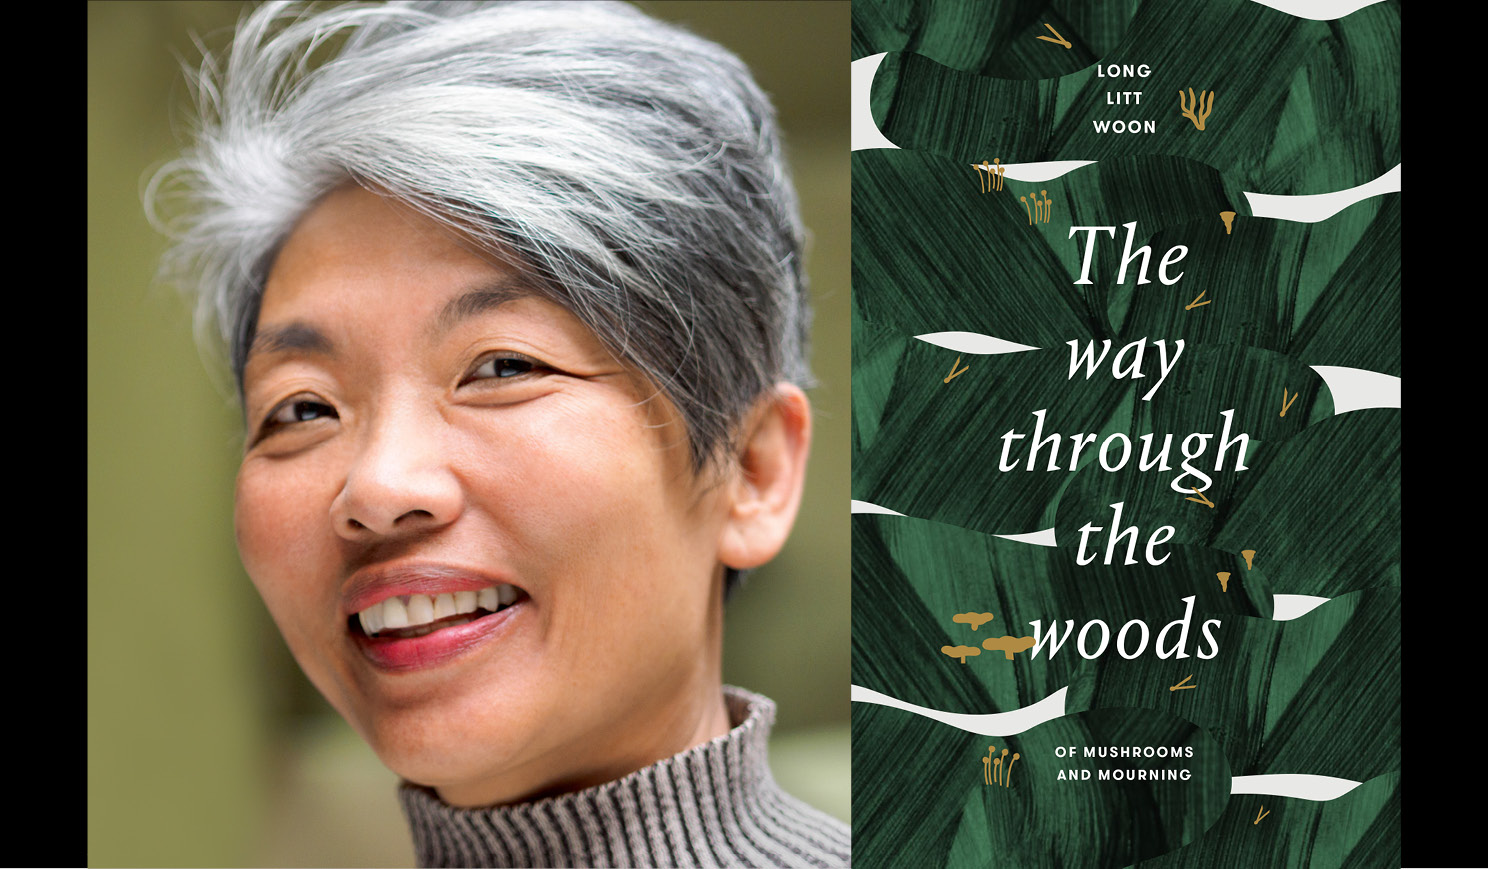 Long Litt Woon alongside the cover of her book The Way through the woods